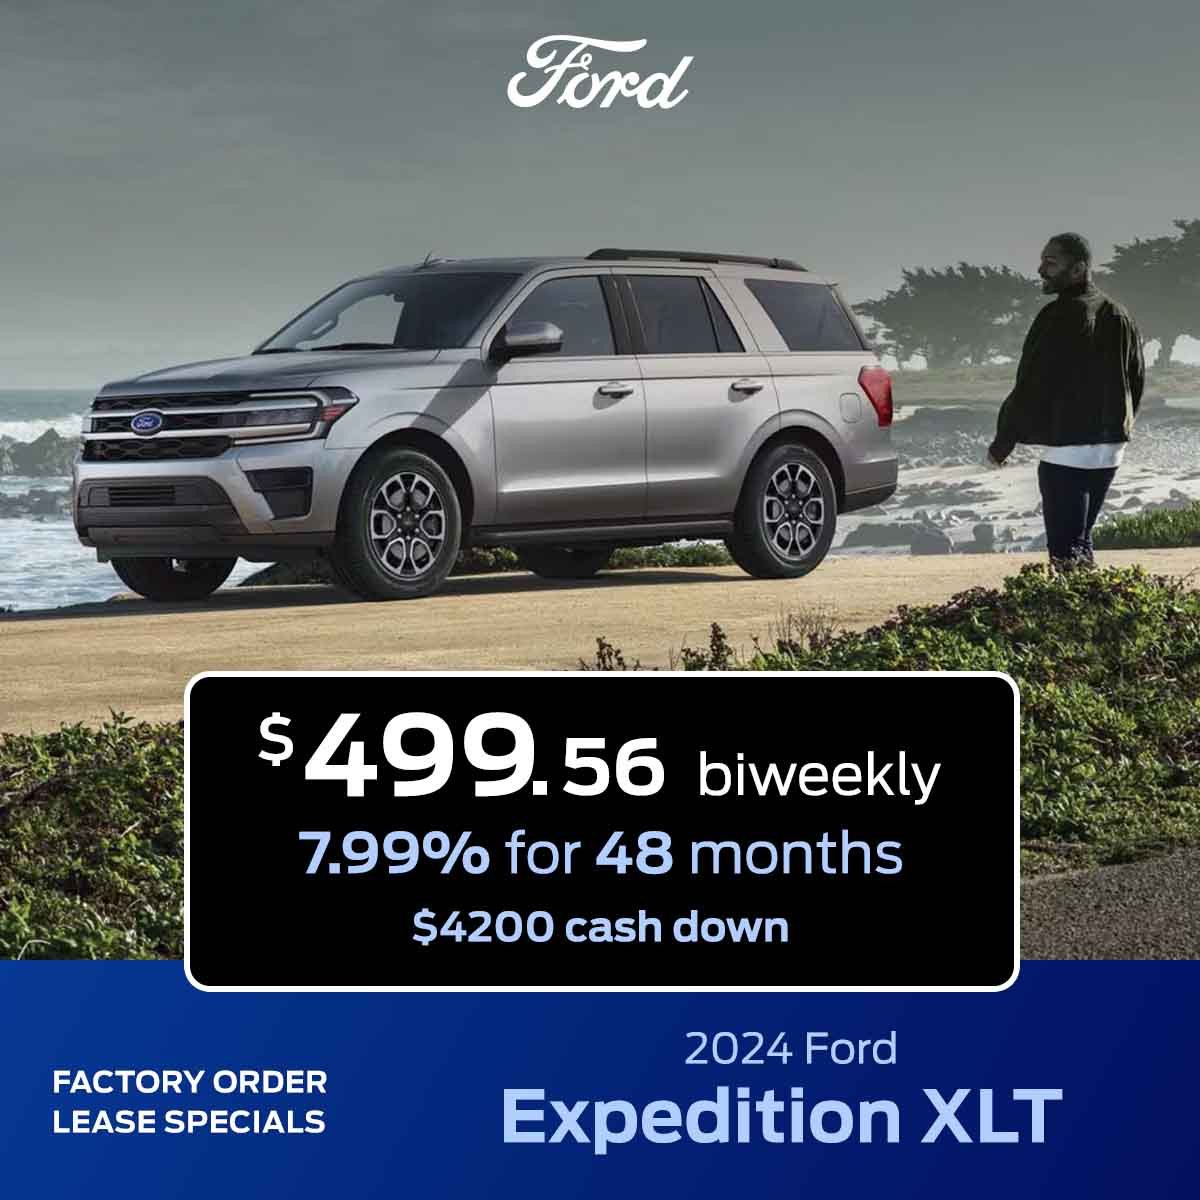 Expedition XLT Ford Lease Special